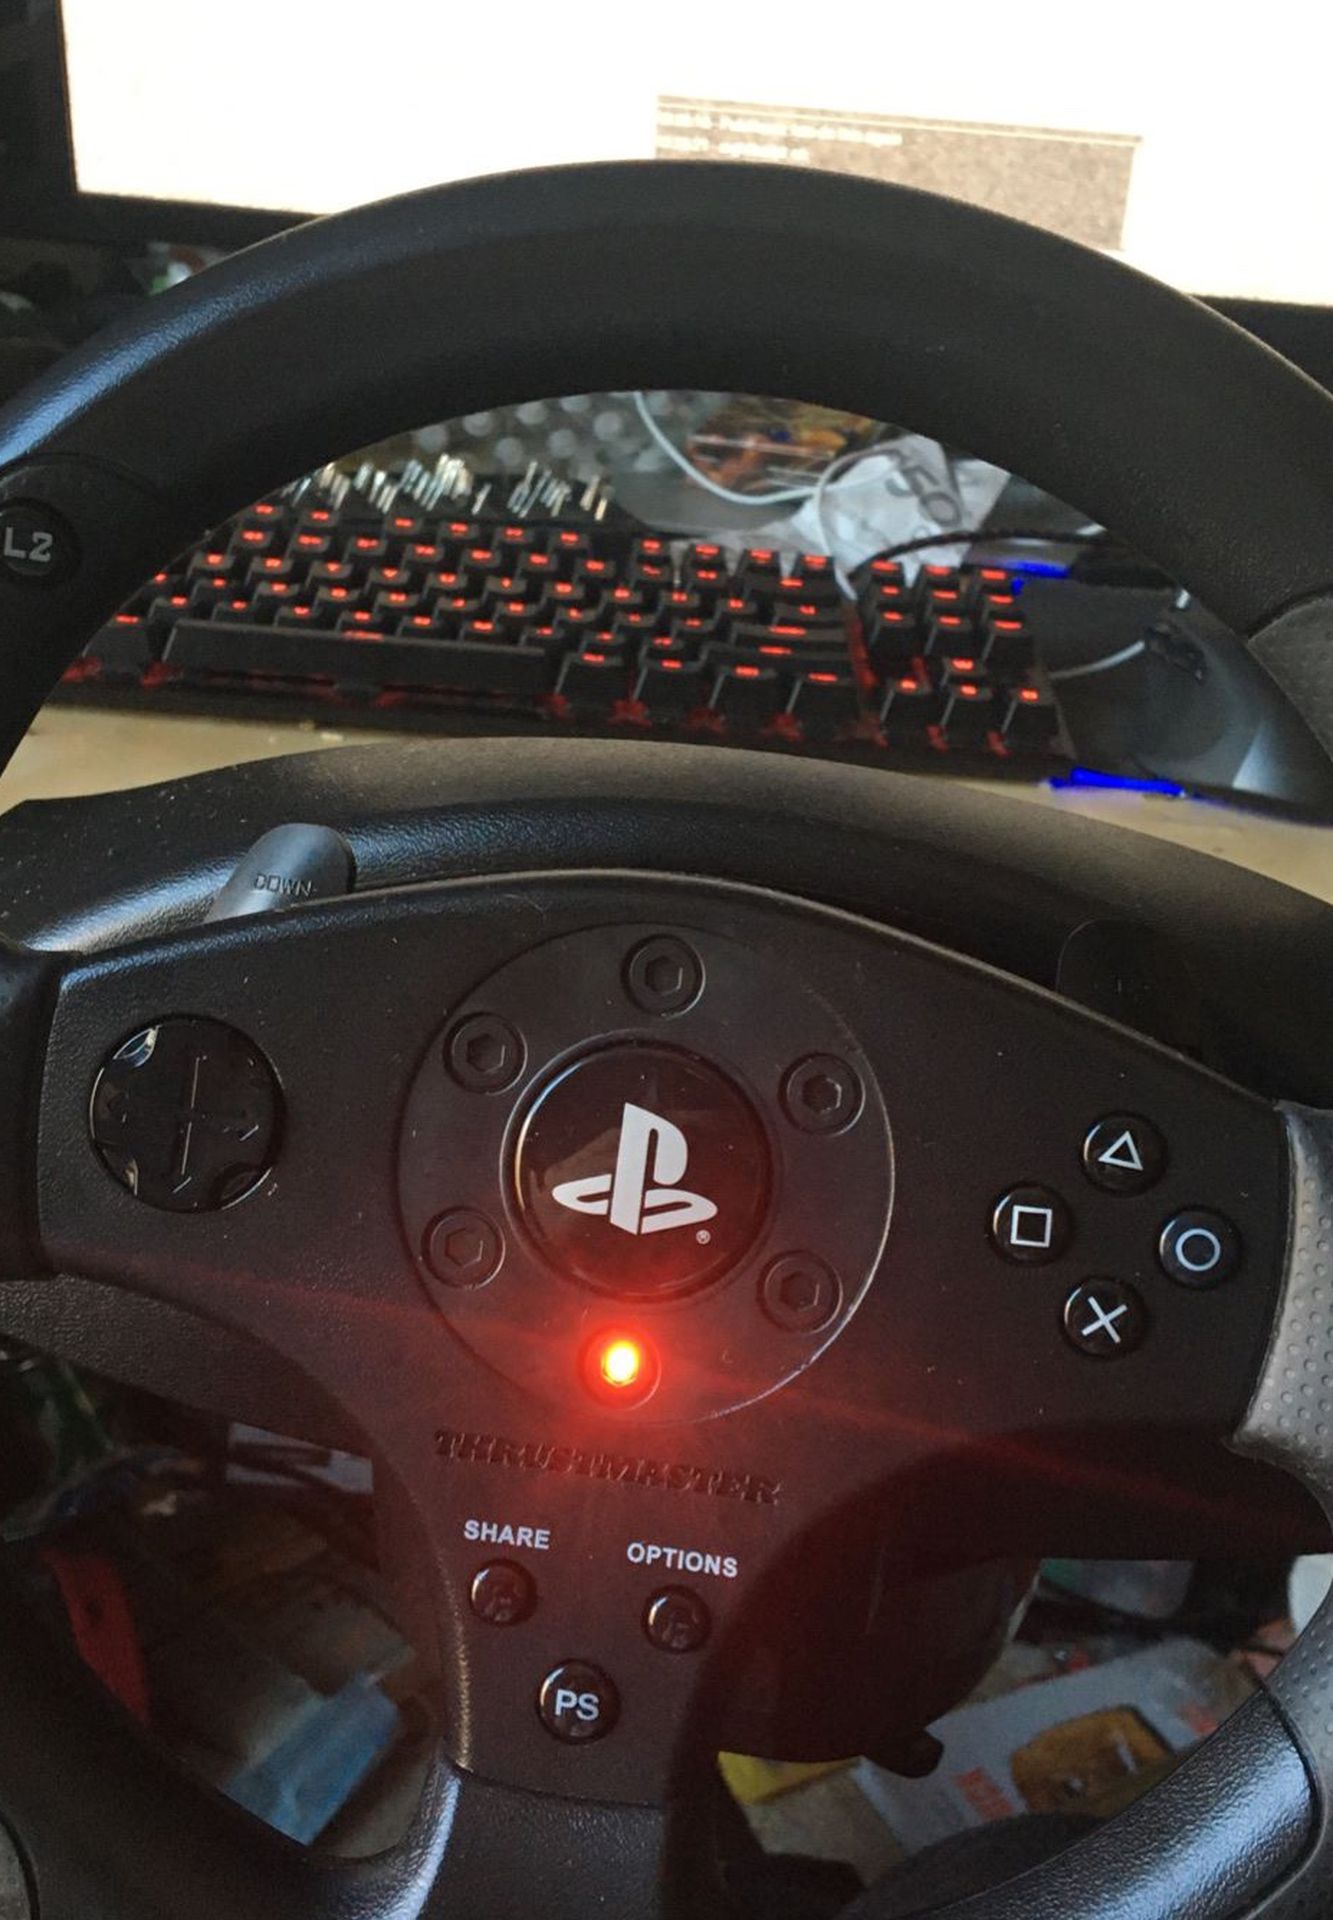 Thrust master t80 steering wheel for pc ps3 and ps4